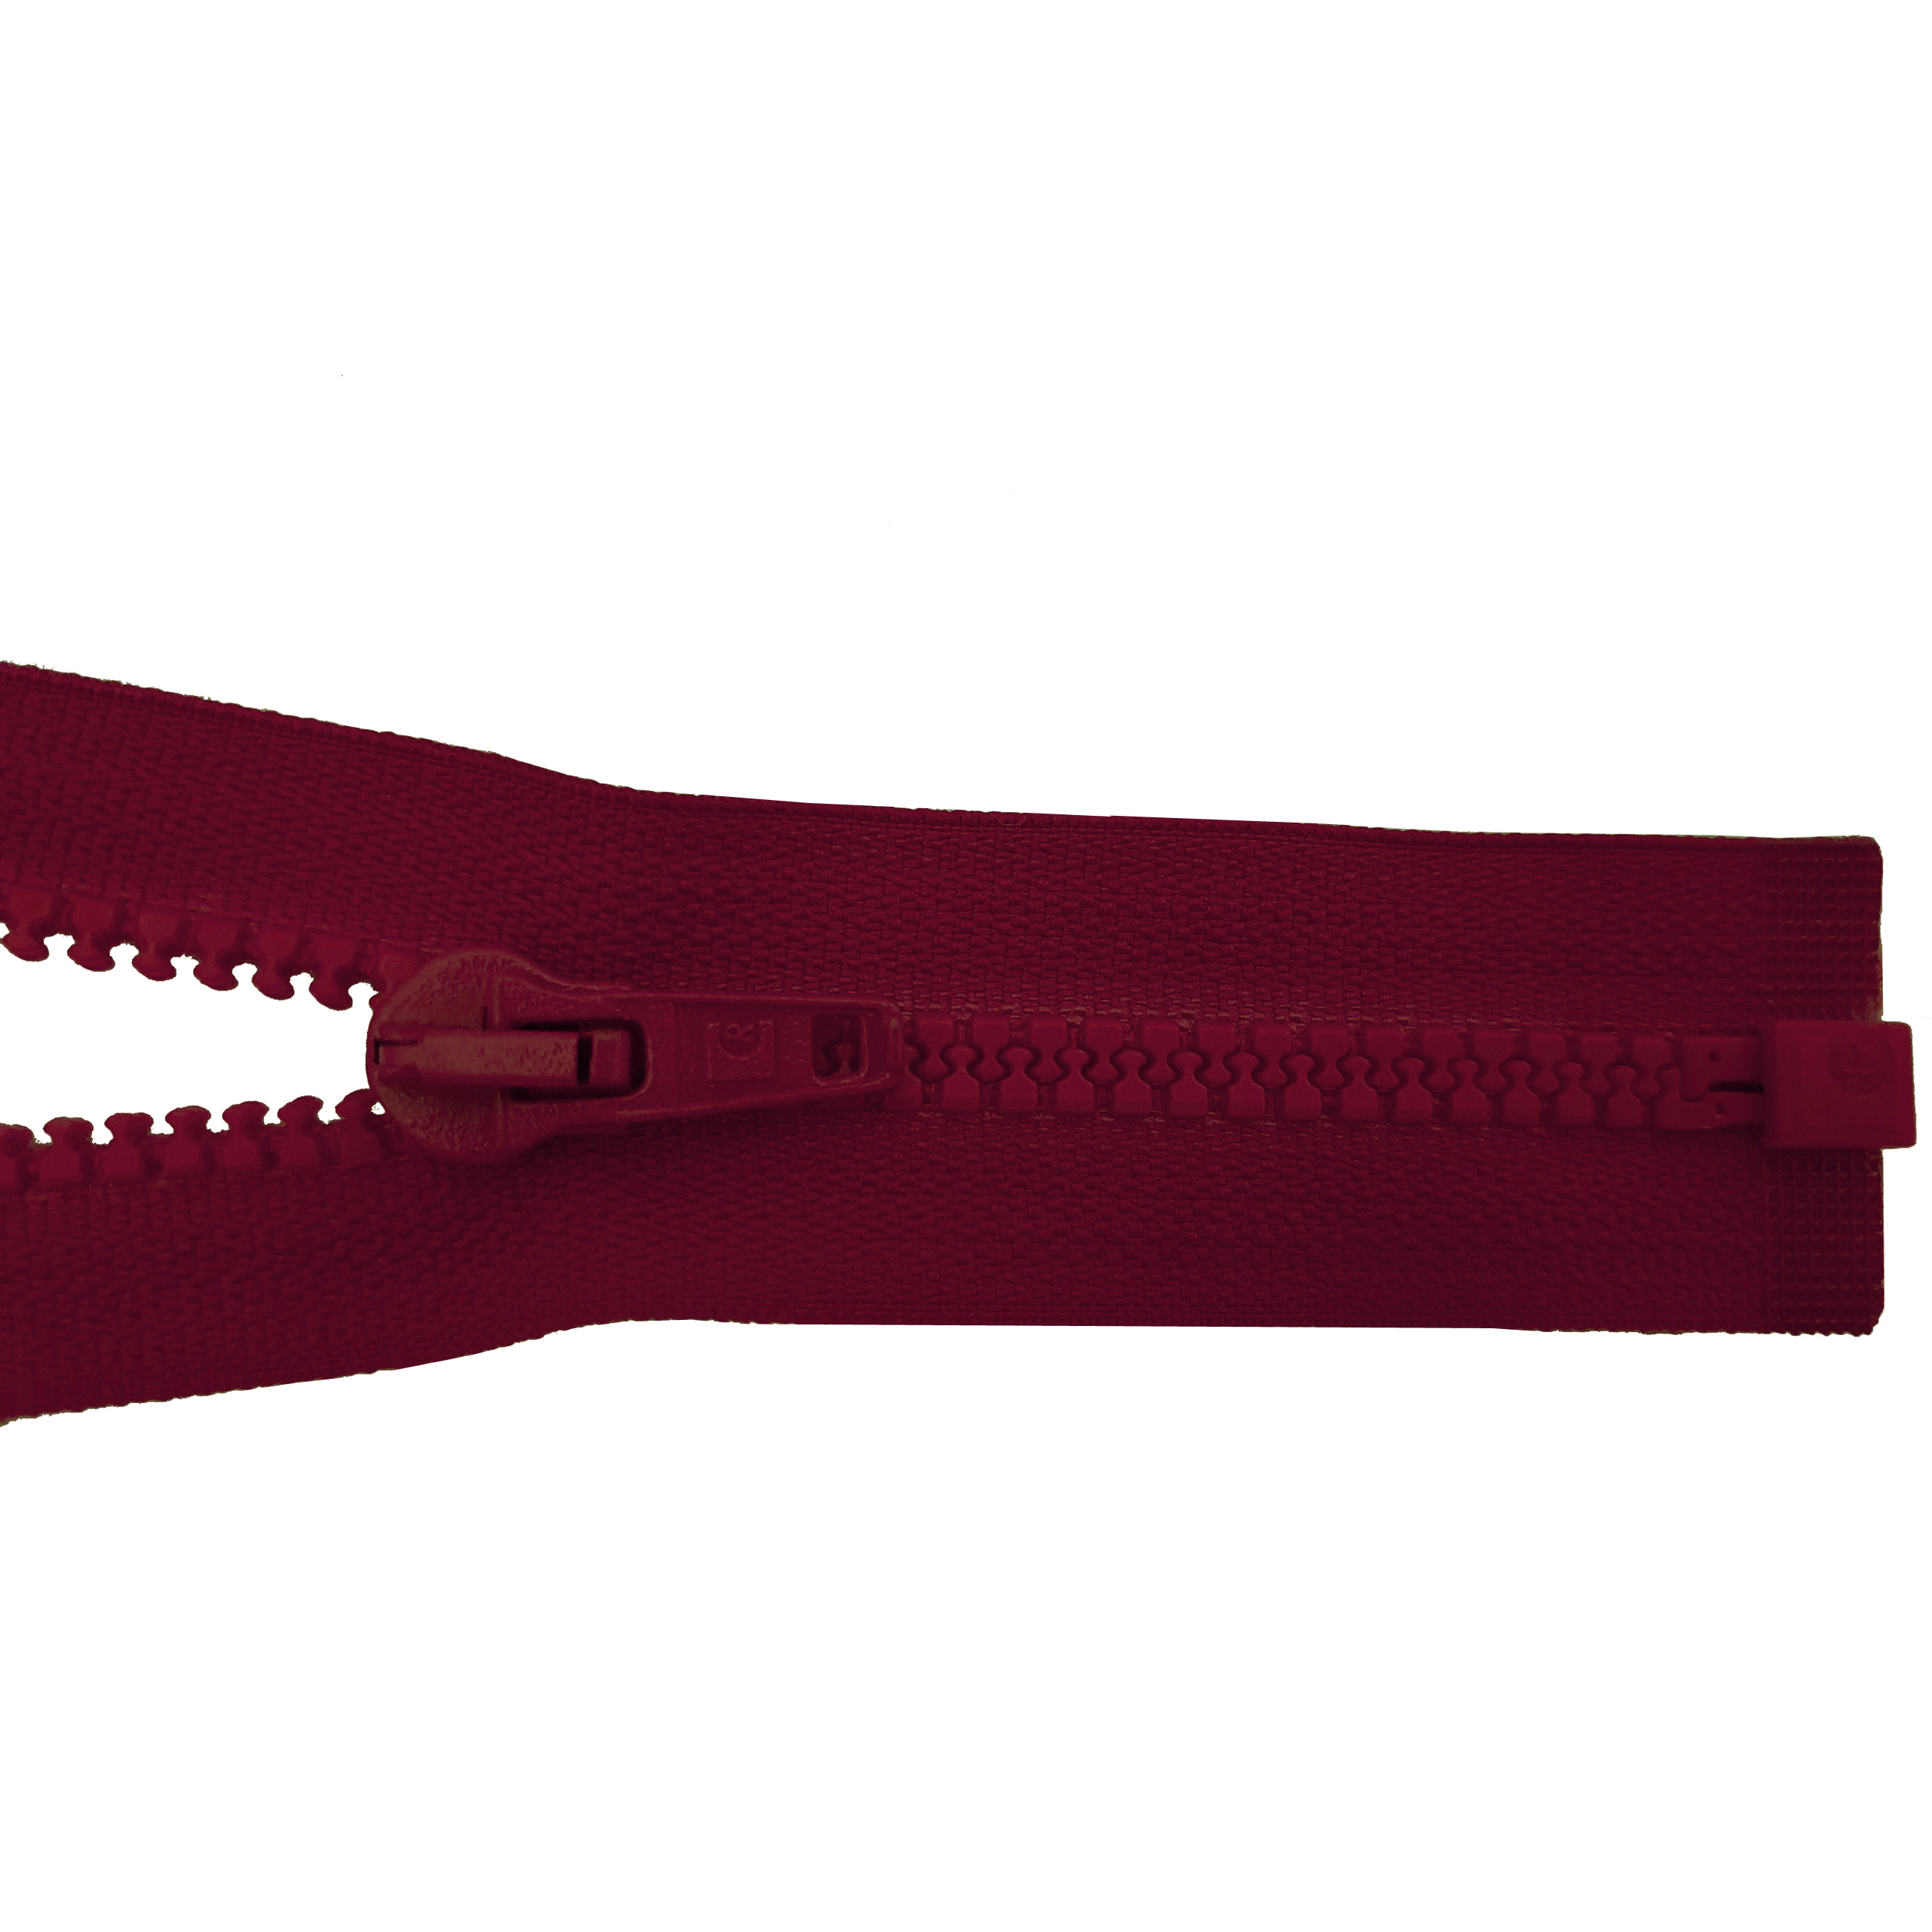 zipper 80cm,divisible, molded plastic, wide, wine red